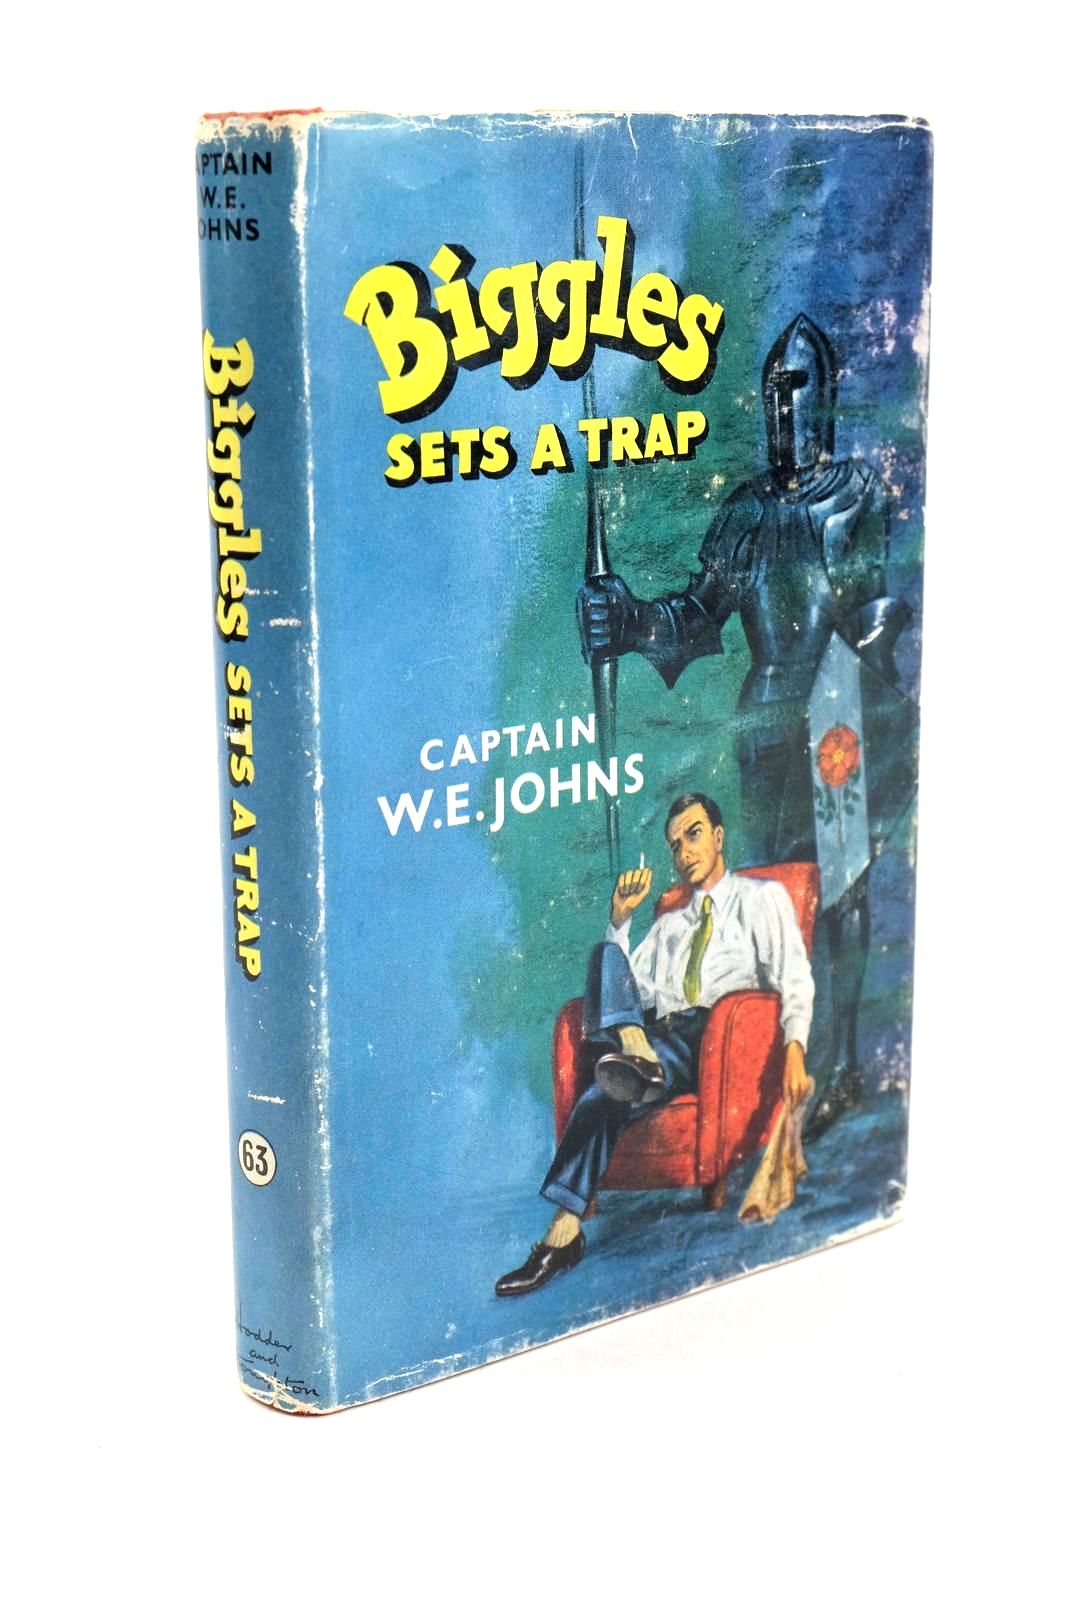 Photo of BIGGLES SETS A TRAP written by Johns, W.E. illustrated by Stead,  published by Hodder & Stoughton (STOCK CODE: 1324109)  for sale by Stella & Rose's Books